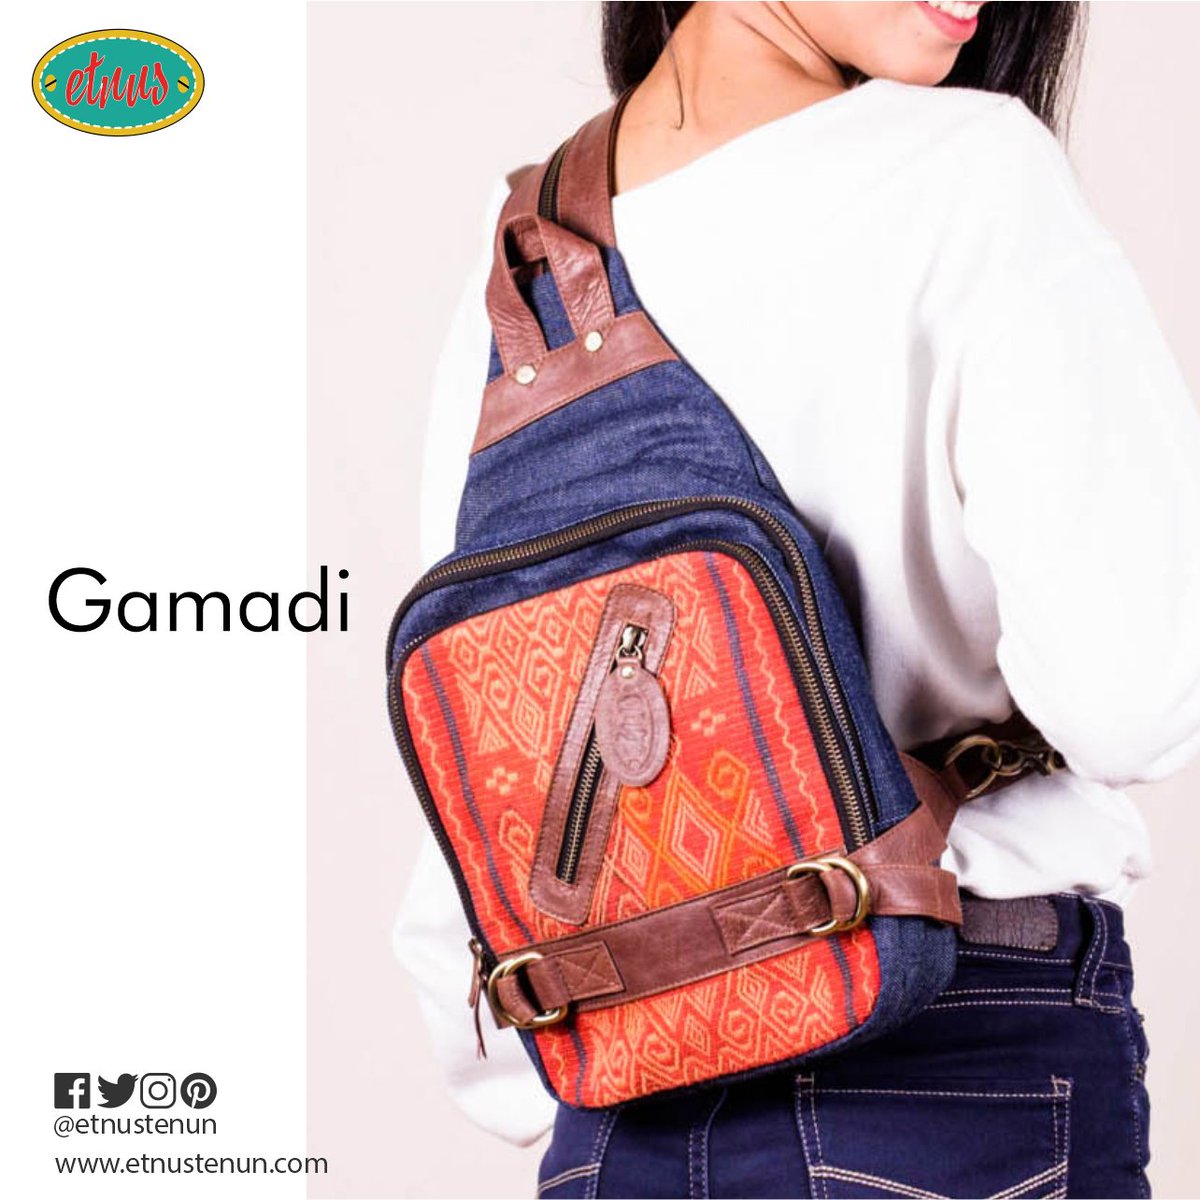 Gamadi; a casually ethnic on handwoven yet clearly a delight to gaze at. It is even a perfect daily bag. Get a head start to shop!

#casualbag

#backpackforwoman

#casualbackpack

#casualstyle

#ethnicstyle

#denimbag

#tasetnik

#tasranselwanita

#giniginigoonline